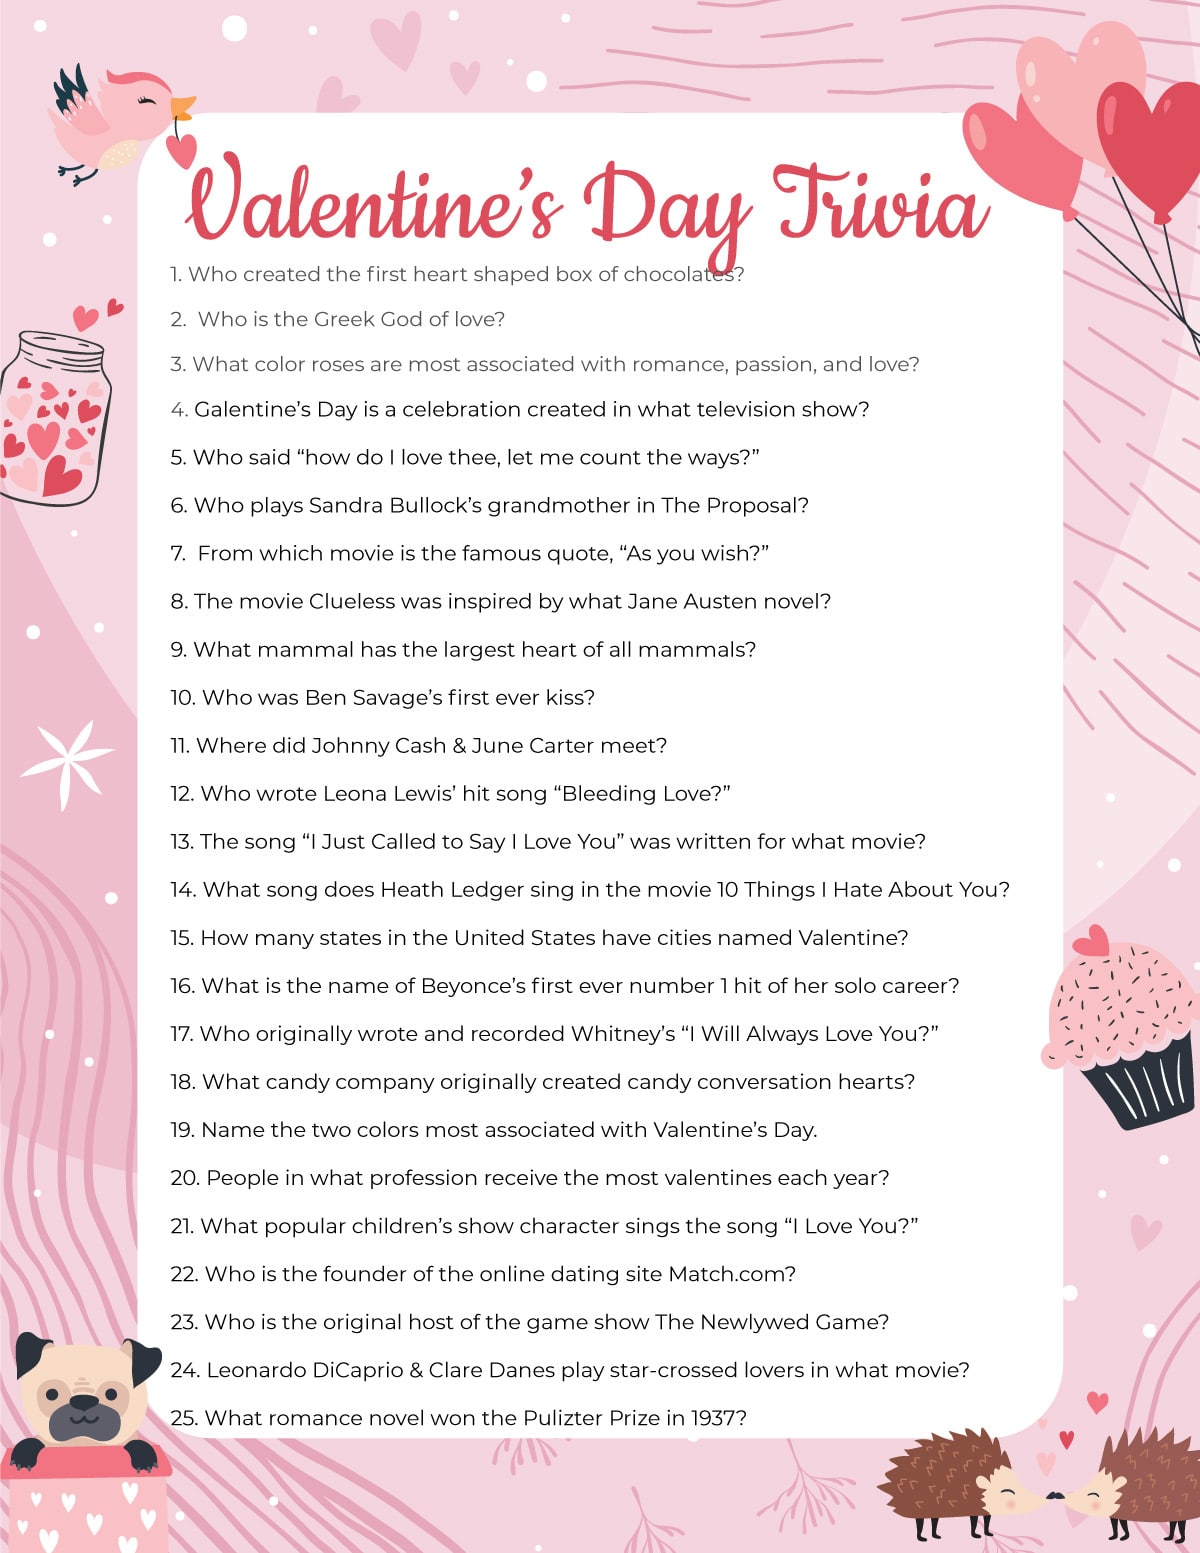 Valentines Day Trivia Questions  Free Printable   - 56